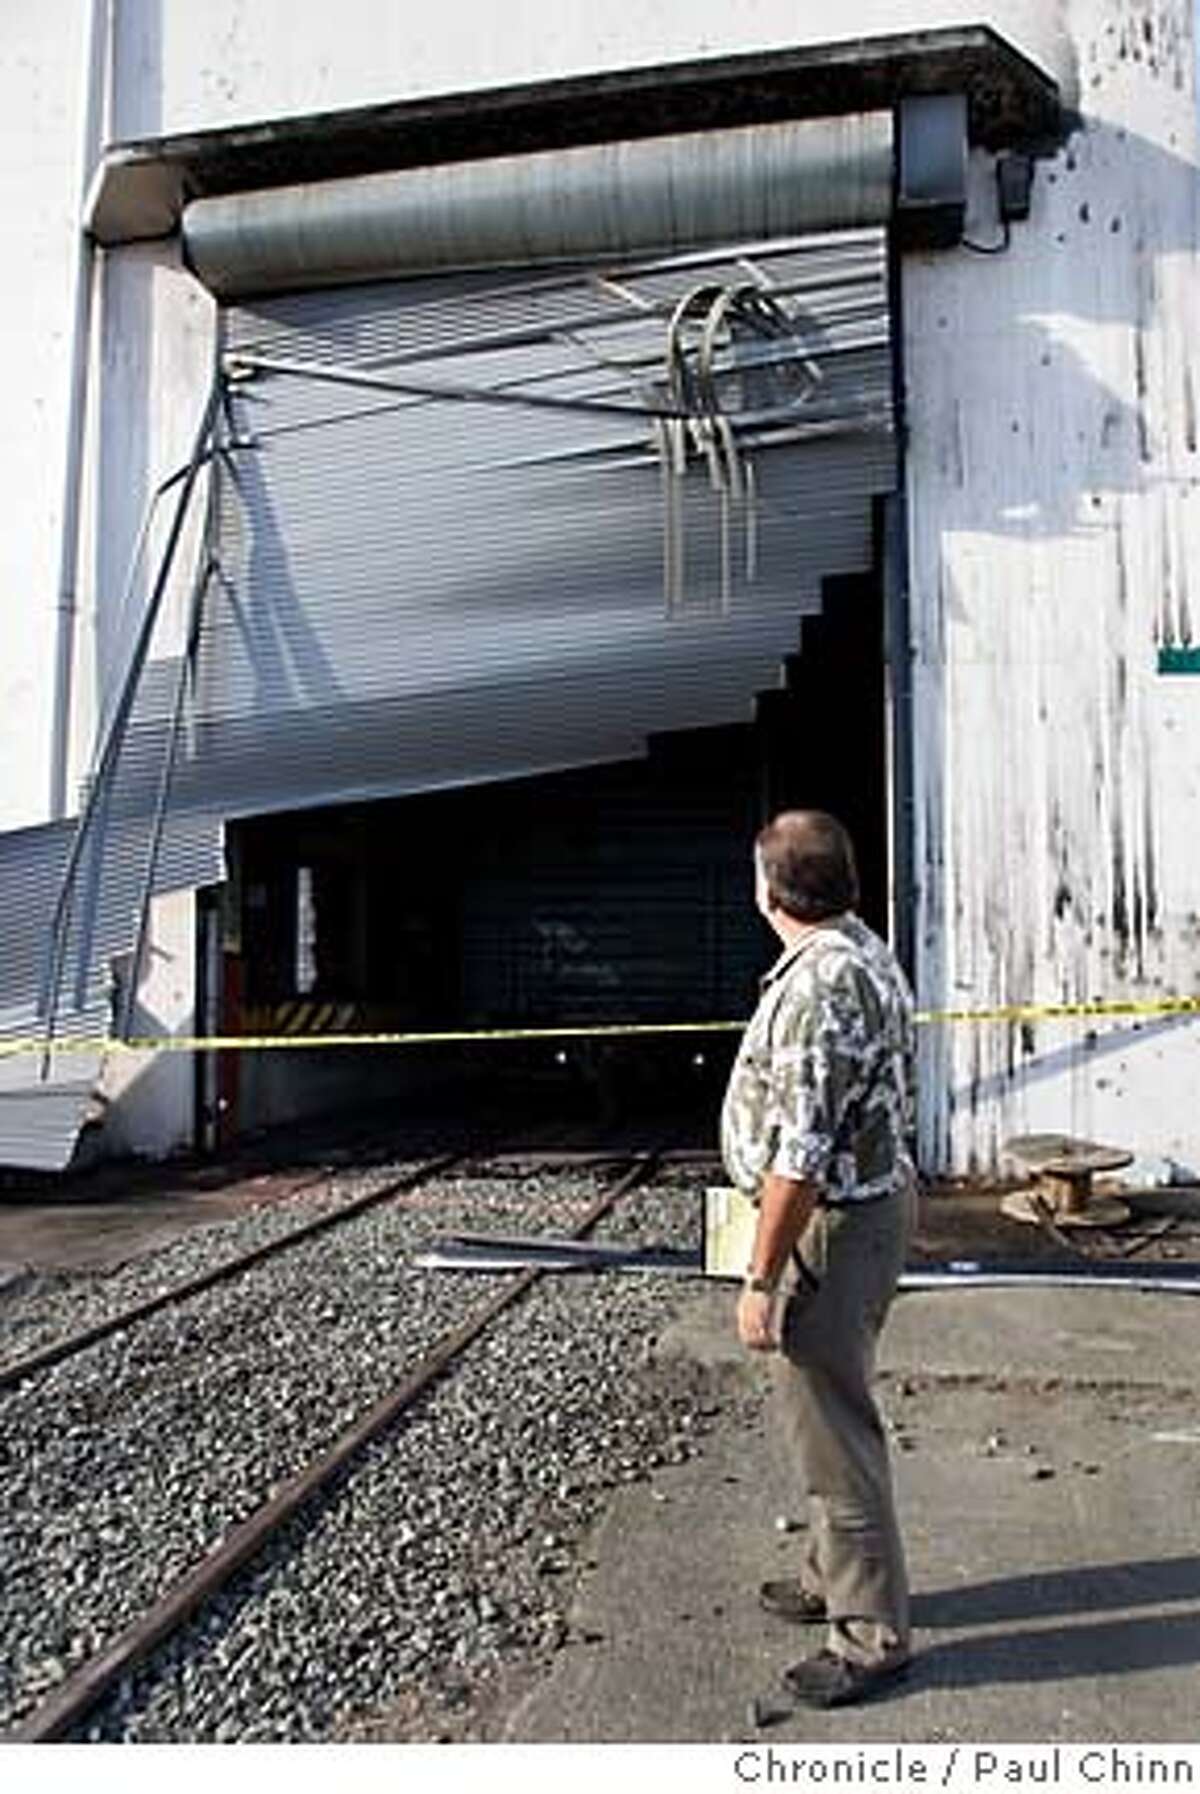 Insurance adjuster Richard Reimche inspects a rollup door which was apparently blown out from the intense heat. ATF agents continue to investigate a warehouse blaze on Oct. 14, 2005 in Vallejo, Calif. More than $100 million in wine, including stock of several well-known Bay Area wineries, was destroyed by a blaze that burned through a former torpedo bunker turned wine warehouse on Mare Island Wednesday. 